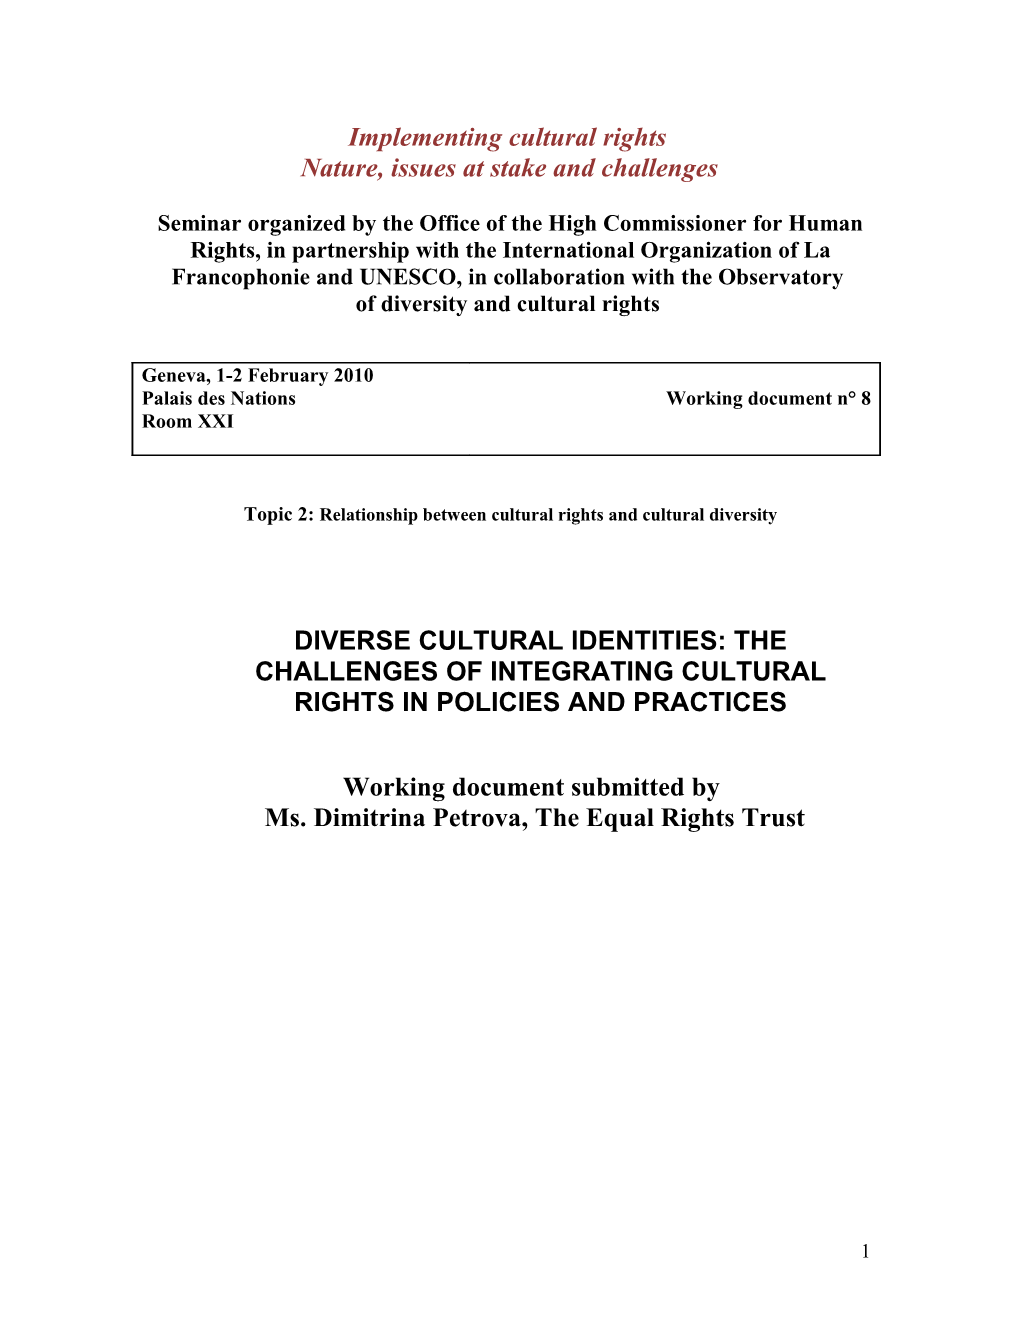 Diverse Cultural Identities: the Challenges of Integrating Cultural Rights in Policies